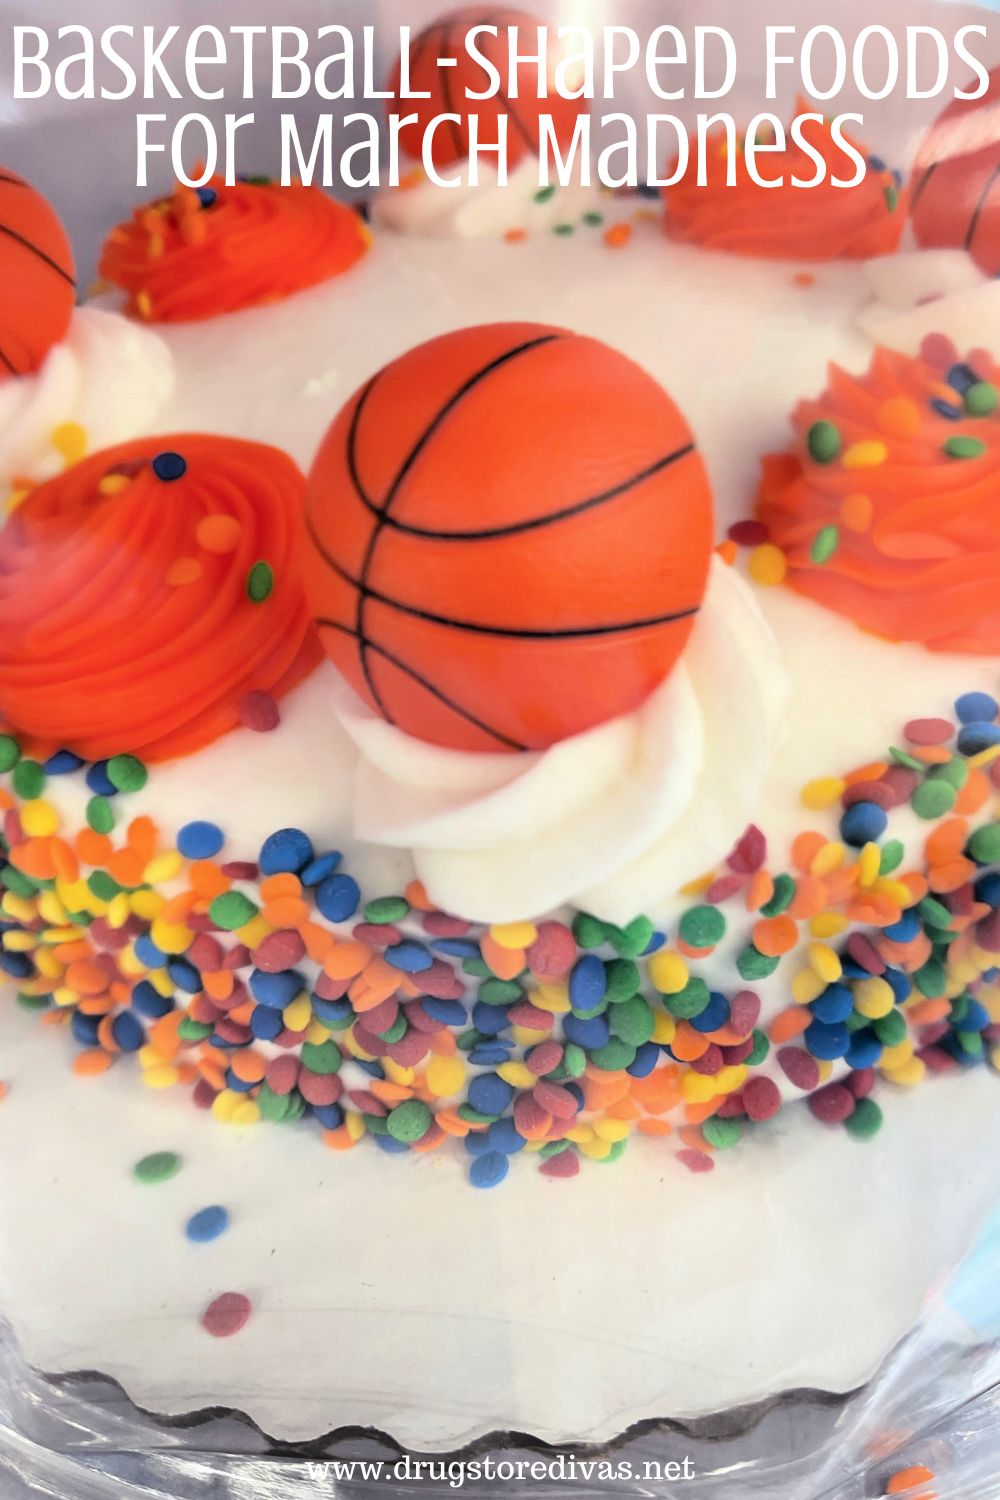 A cake with basketball decorations on it and the words 